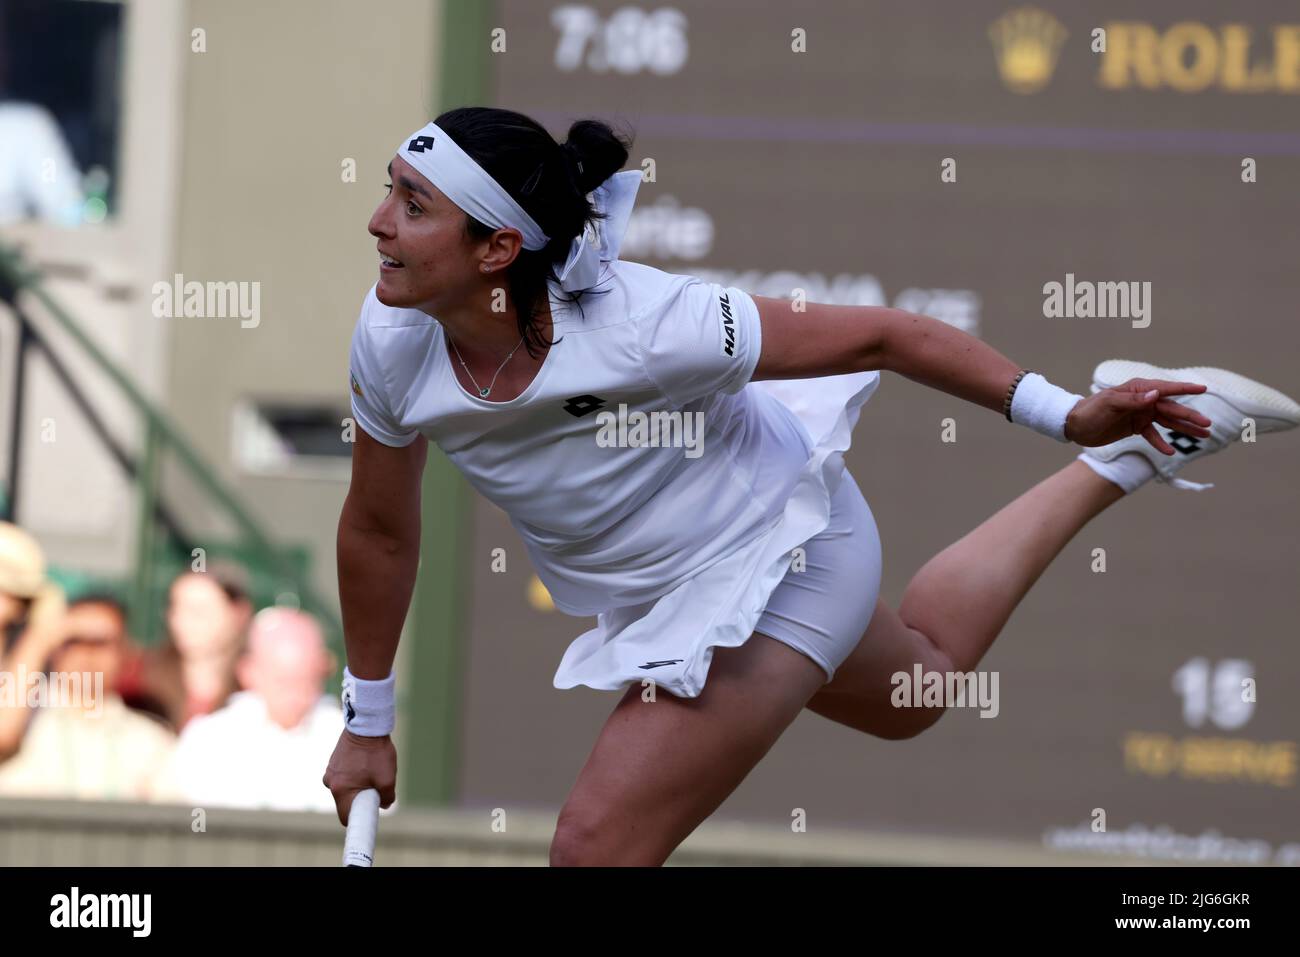 5 July 2022, All England Lawn Tennis Club, Wimbledon, London, United Kingdom:  Tunisia's Ons Jabeur serving during her quarterfinal match against Marie Bouzkova of the Czech Republic at Wimbledon today.  Jabeur won the match to advance to the semi finals. Stock Photo